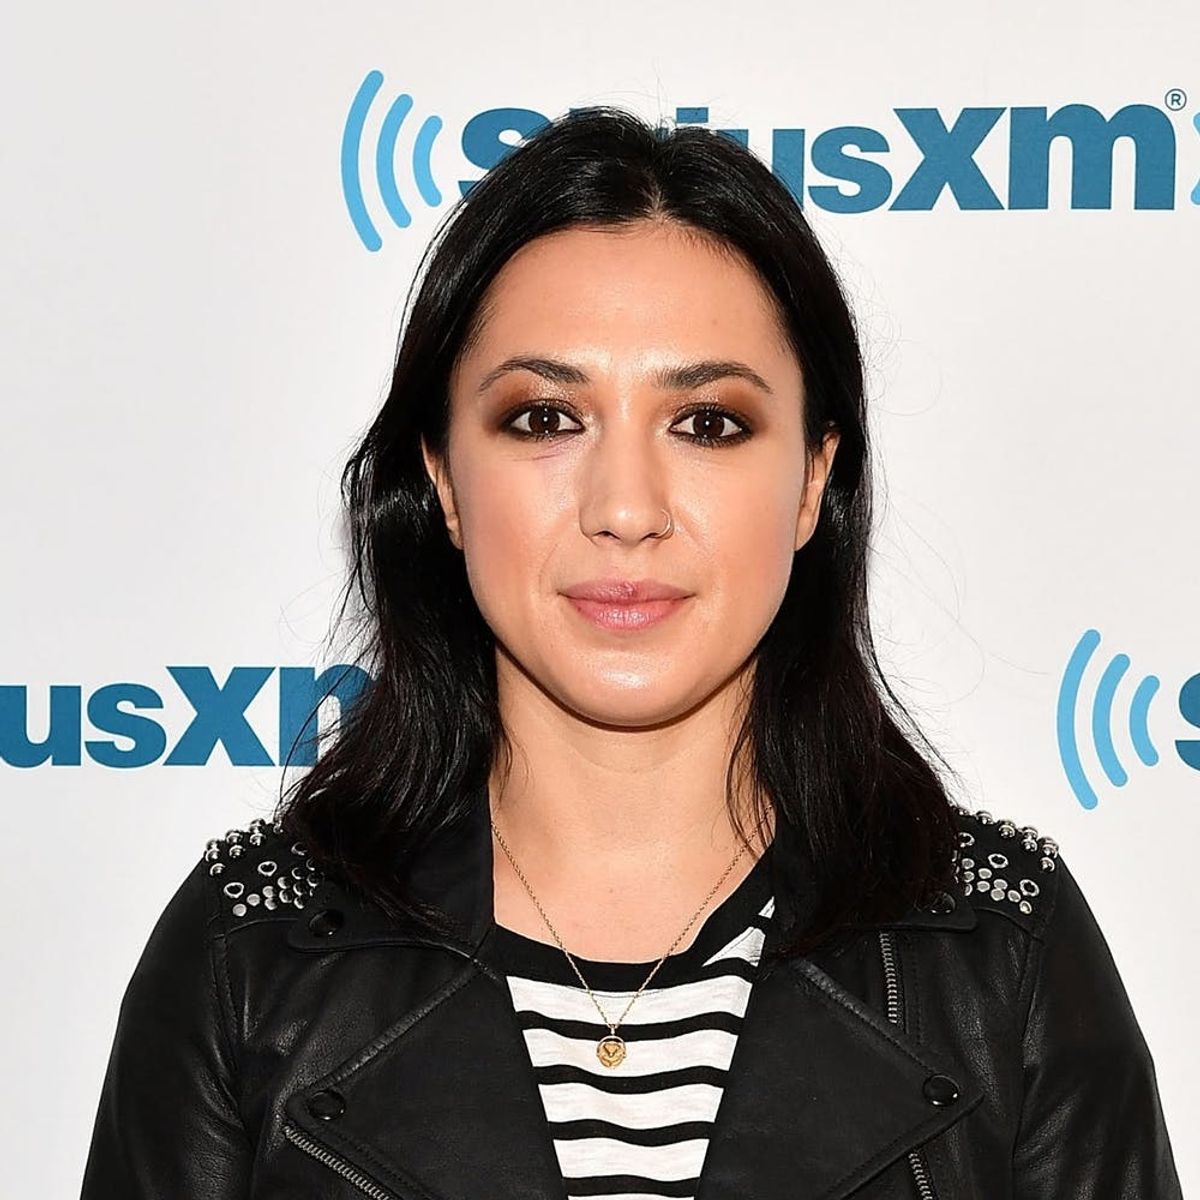 Michelle Branch Got the Best Birthday Present Ever in the Form of a Diamond Engagement Ring